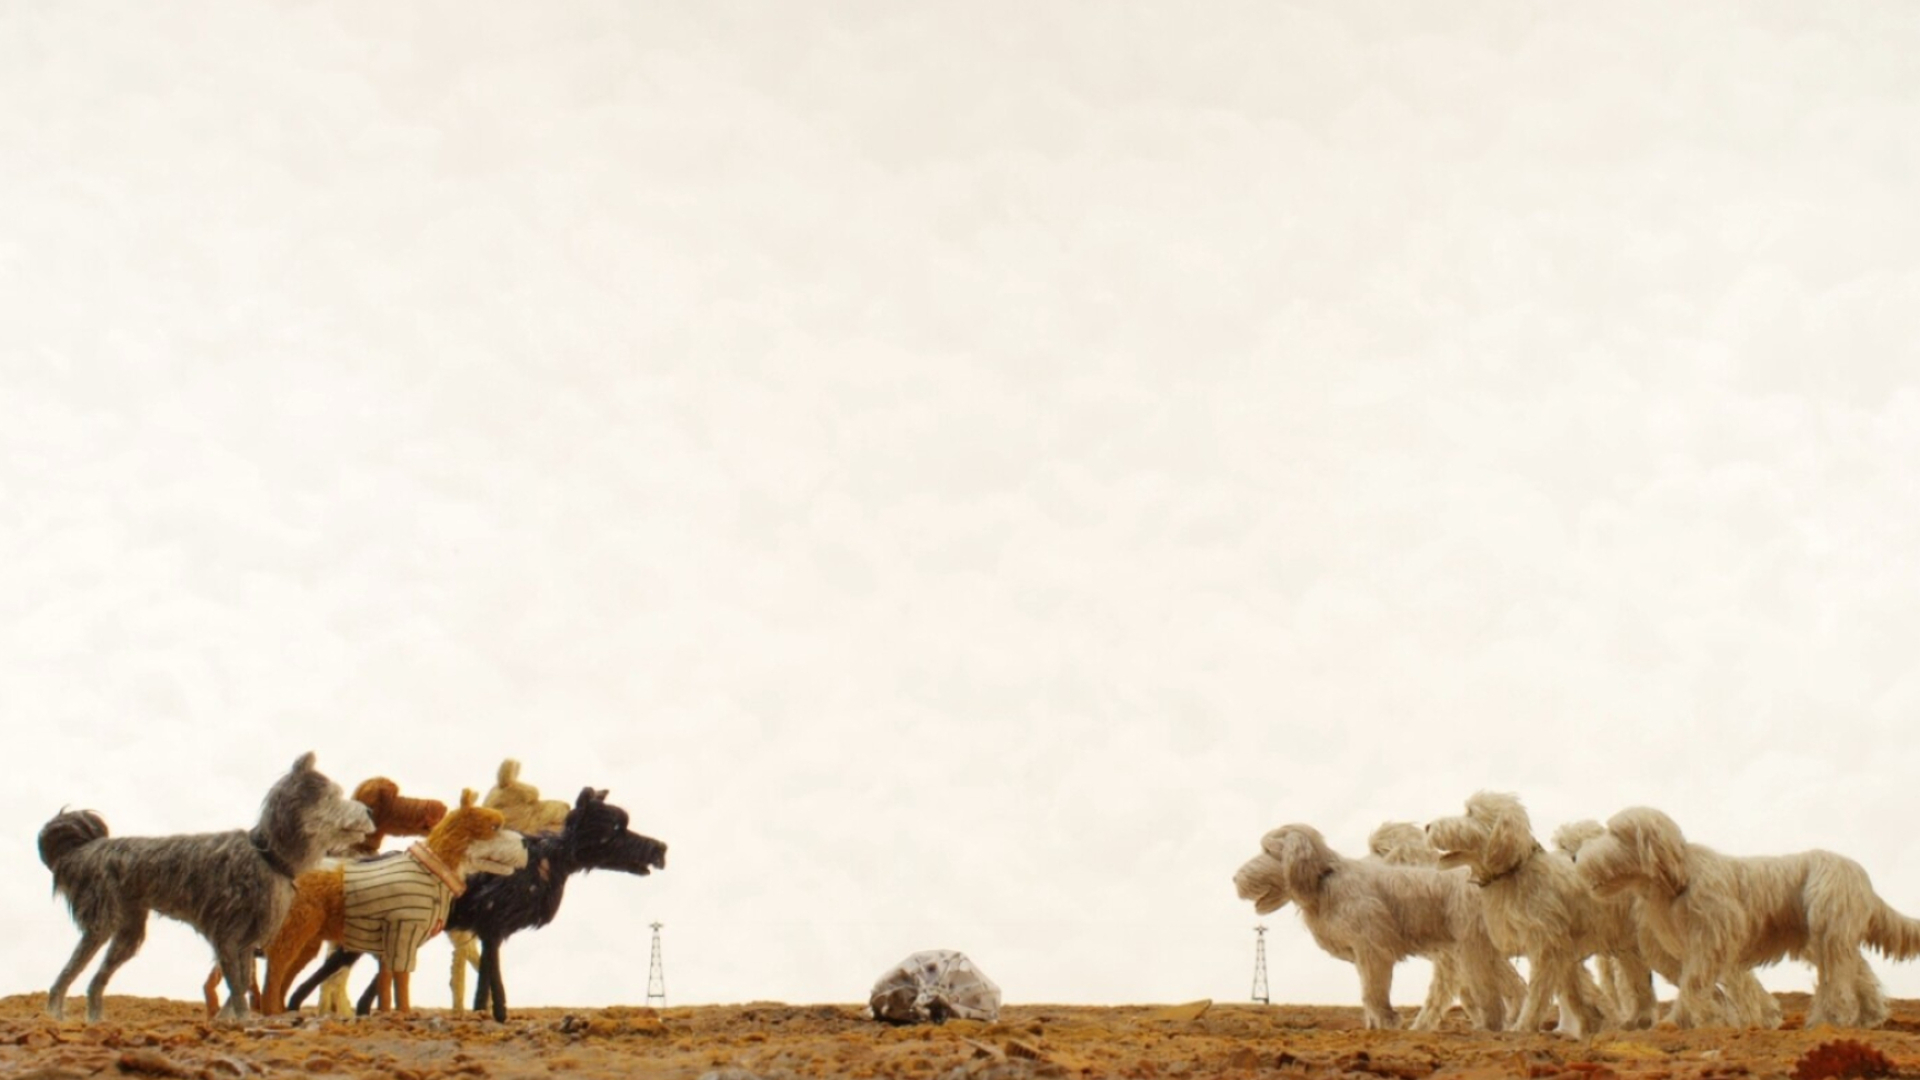 Isle of Dogs: A boy's odyssey in search of his dog, Produced, and directed by Wes Anderson. 1920x1080 Full HD Wallpaper.